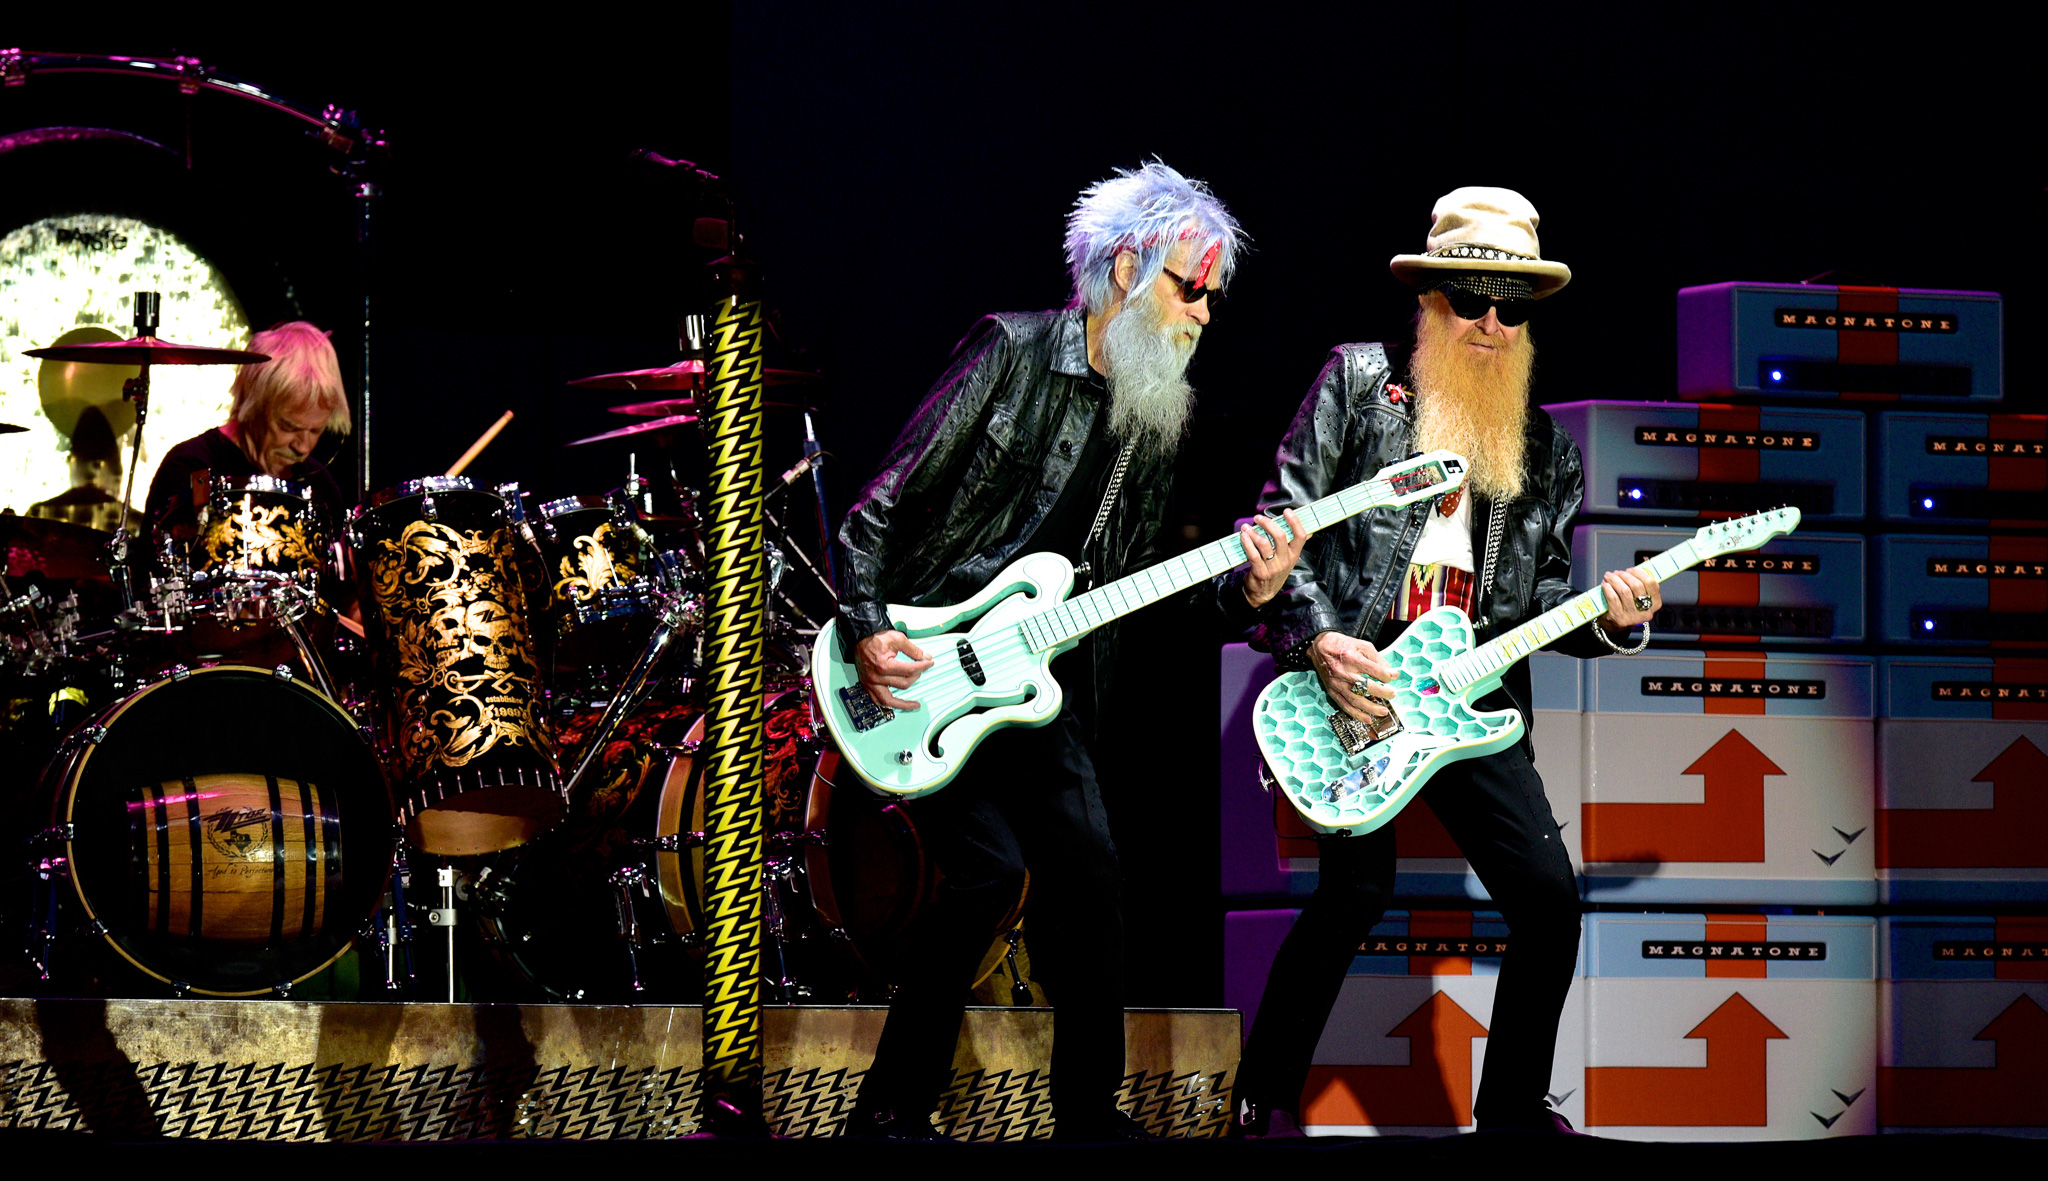 ZZ Top performing on stage